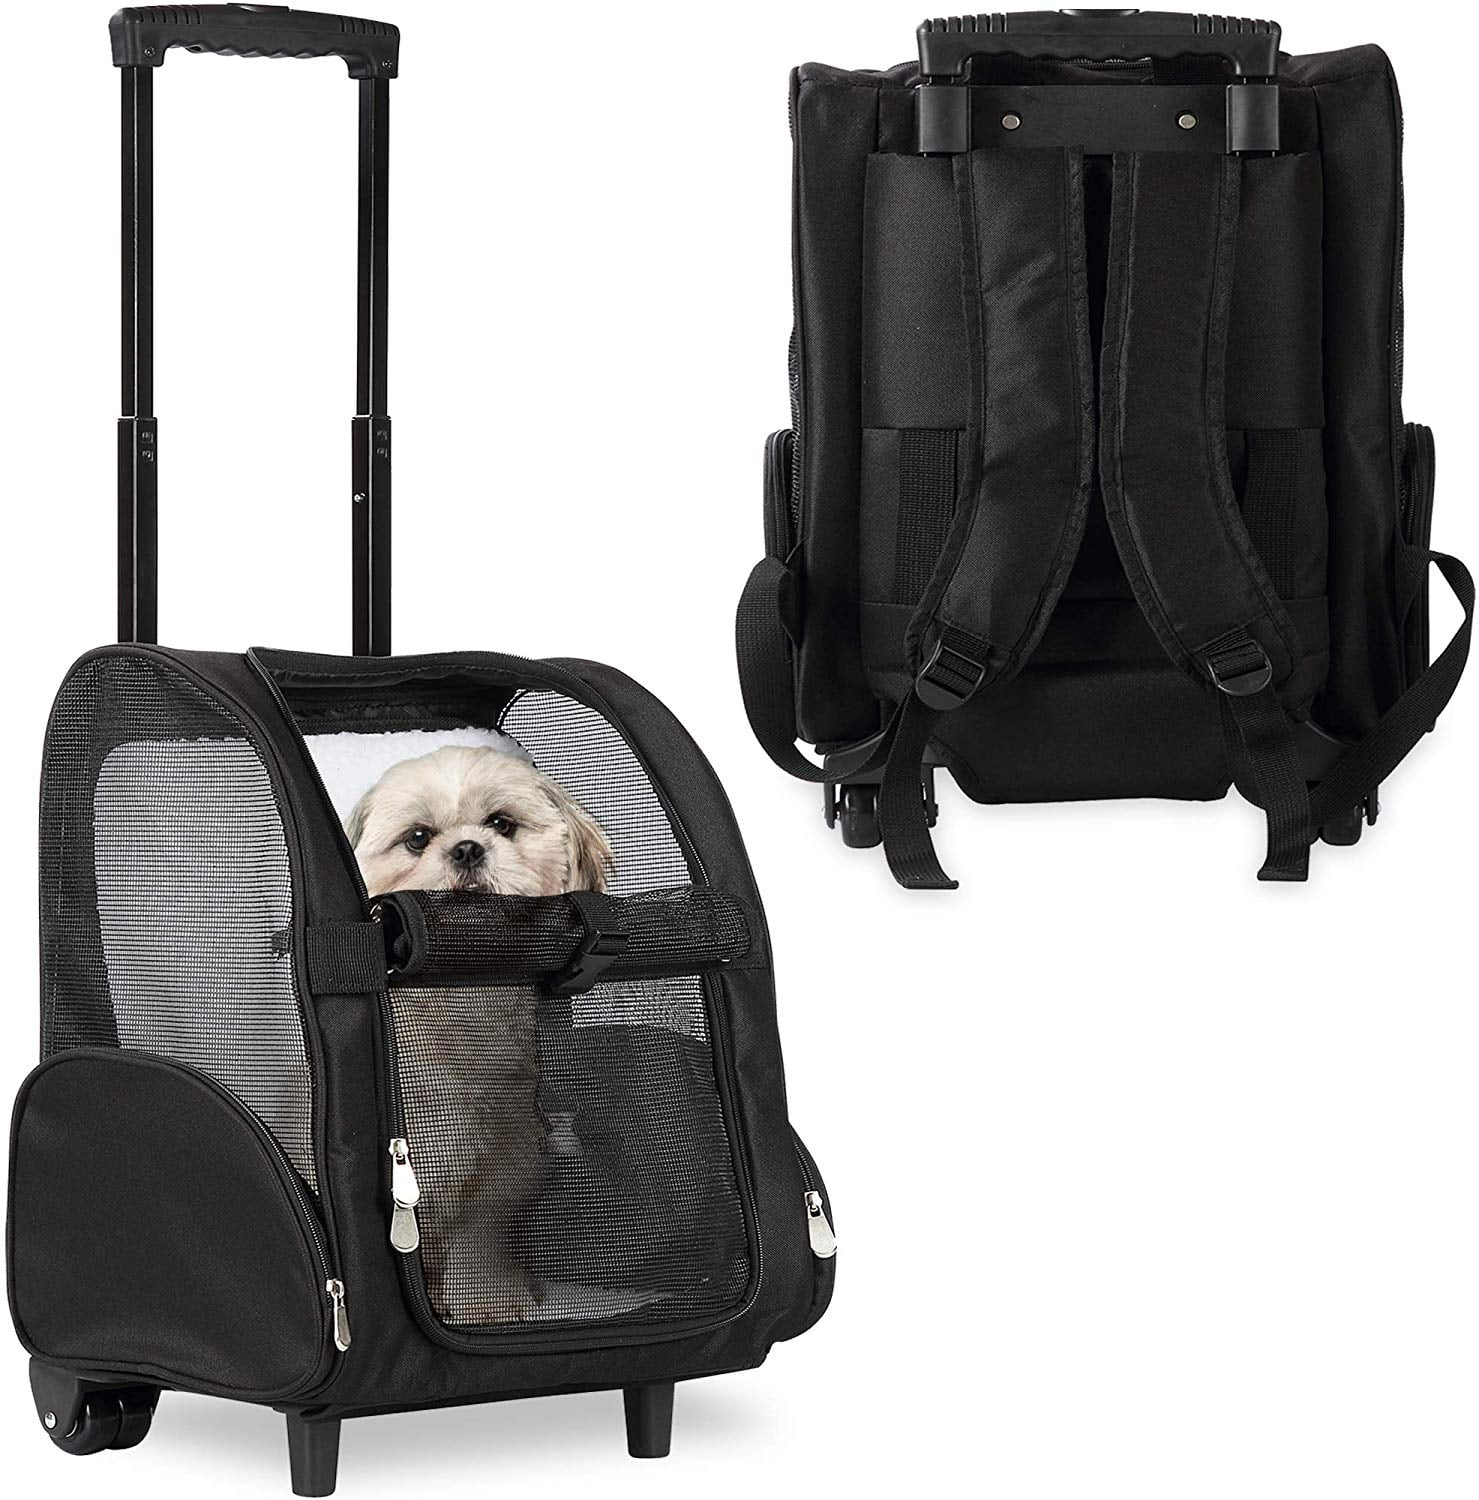 KOPEKS Deluxe Backpack Pet Travel Carrier with Wheels Heather Gray Approved by Most Airlines